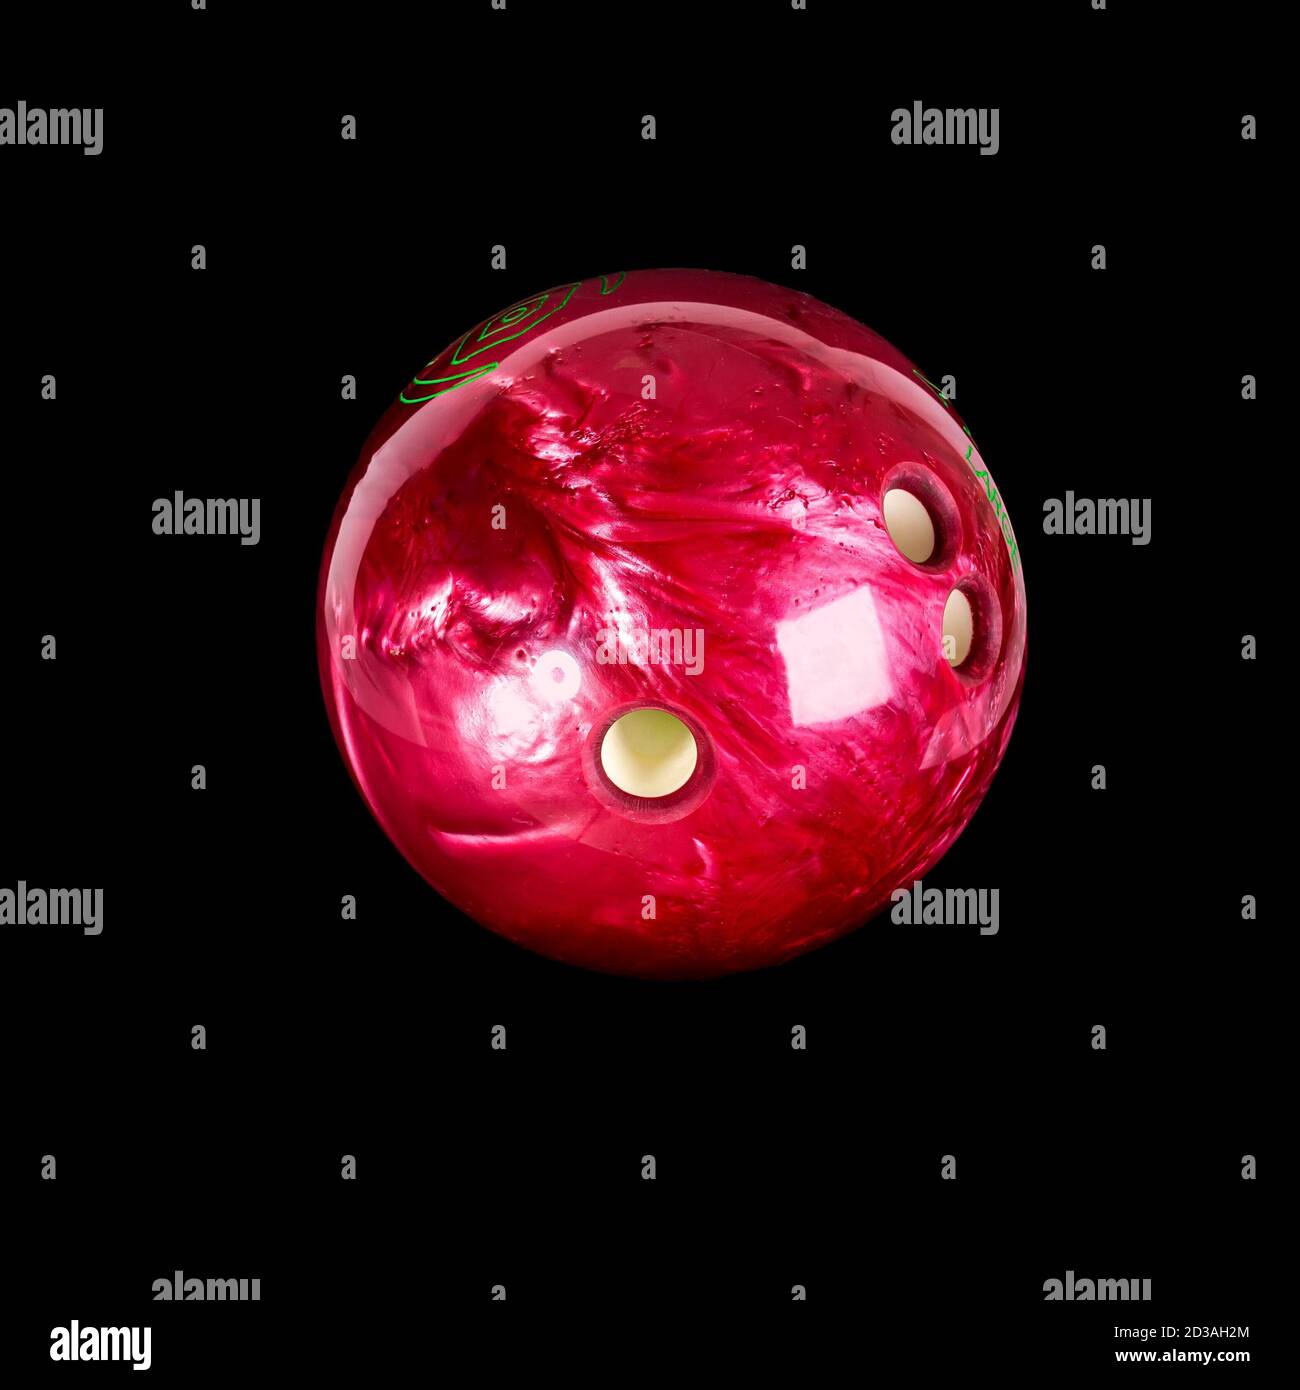 Bowling ball. Isolated on a black background close-up. Stock Photo